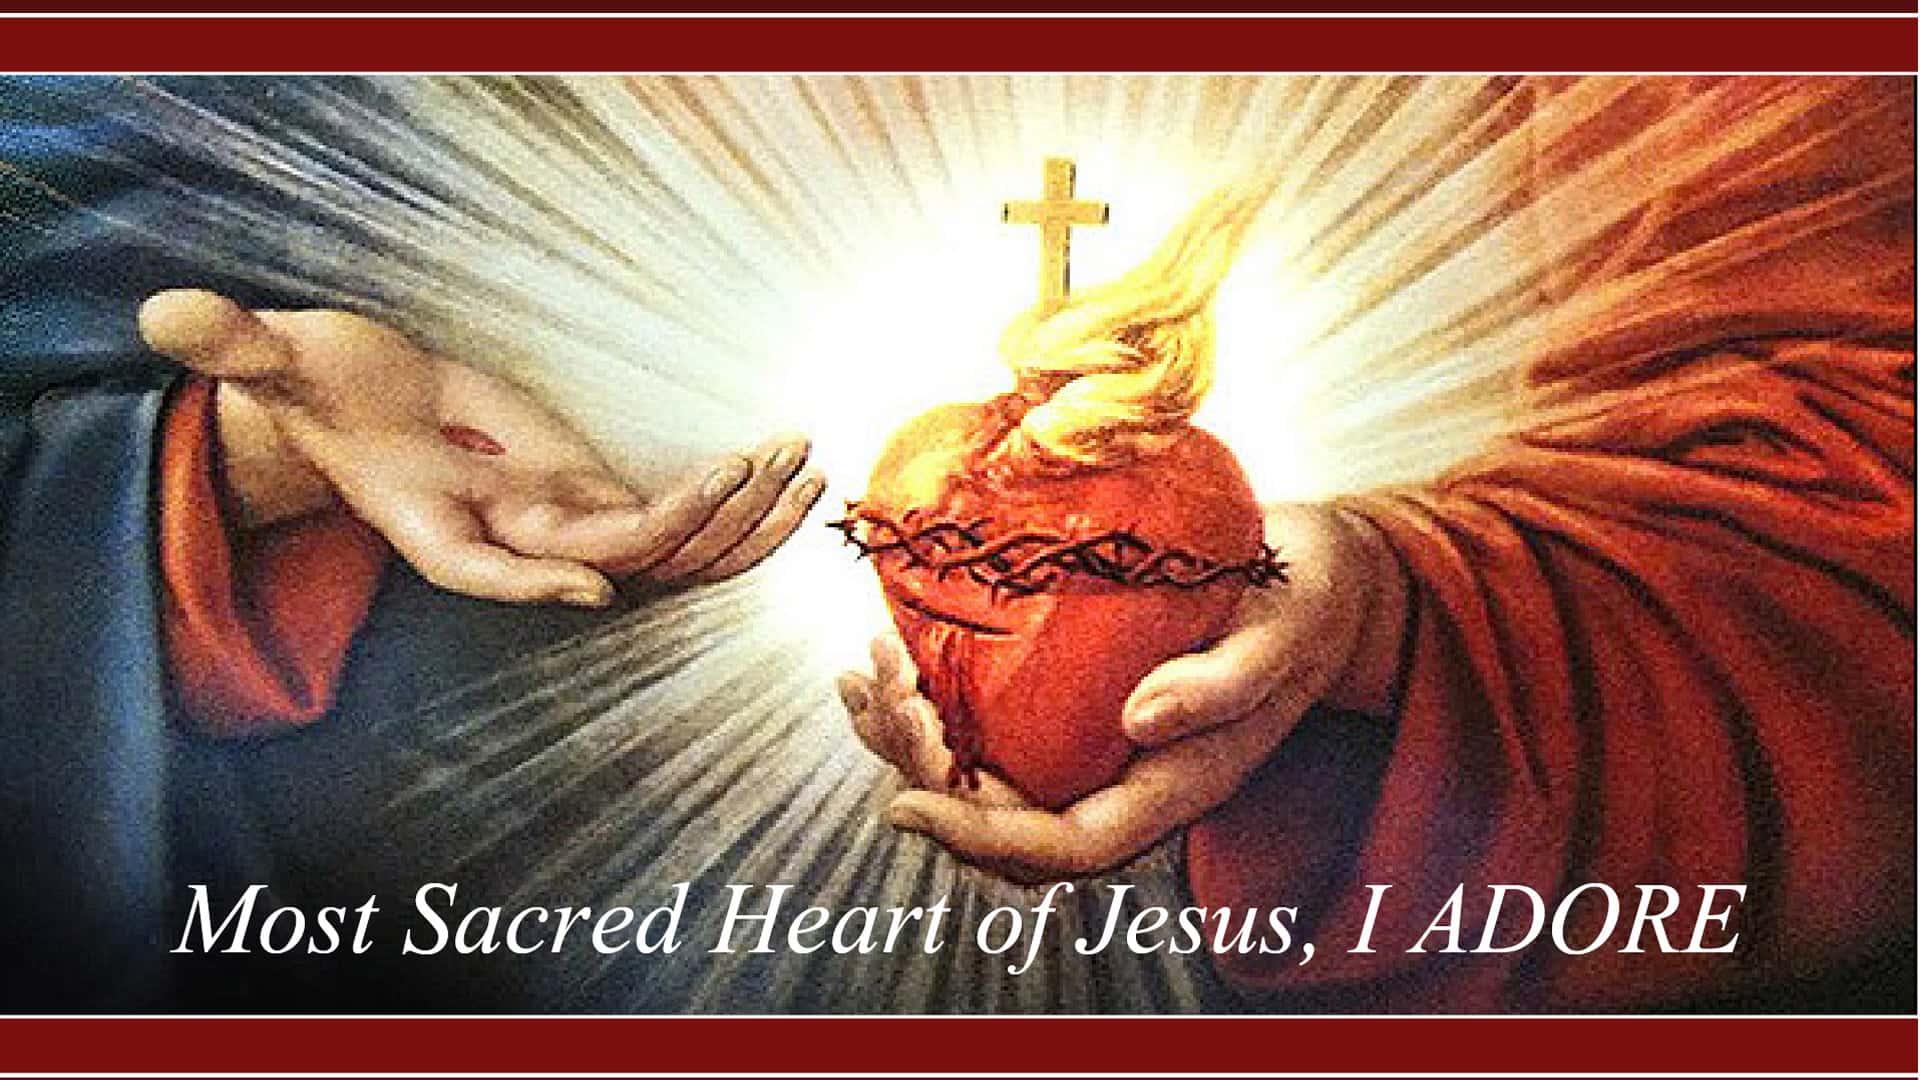 Jesus holding His Sacred Heart, 'Most Sacred Heart of Jesus, I ADORE'